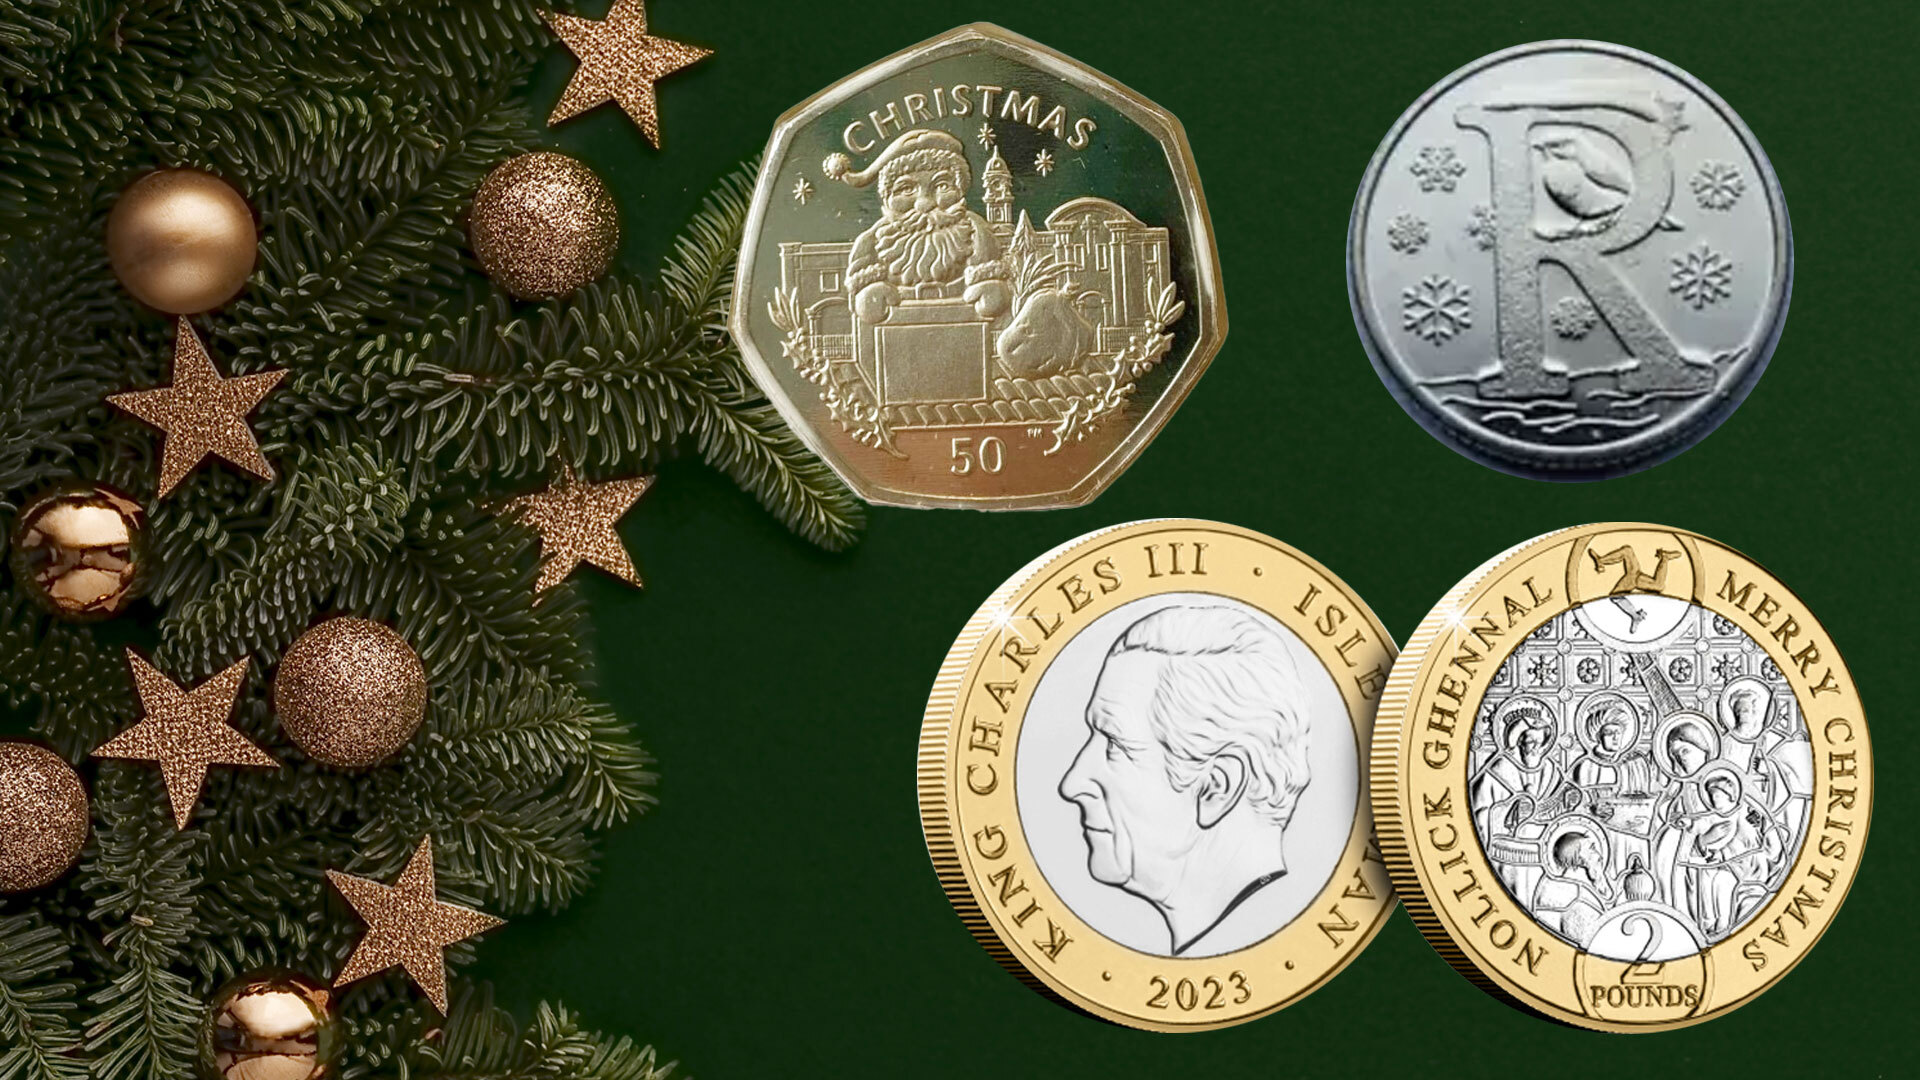 19, Christmas Coins Royalty-Free Photos and Stock Images | Shutterstock